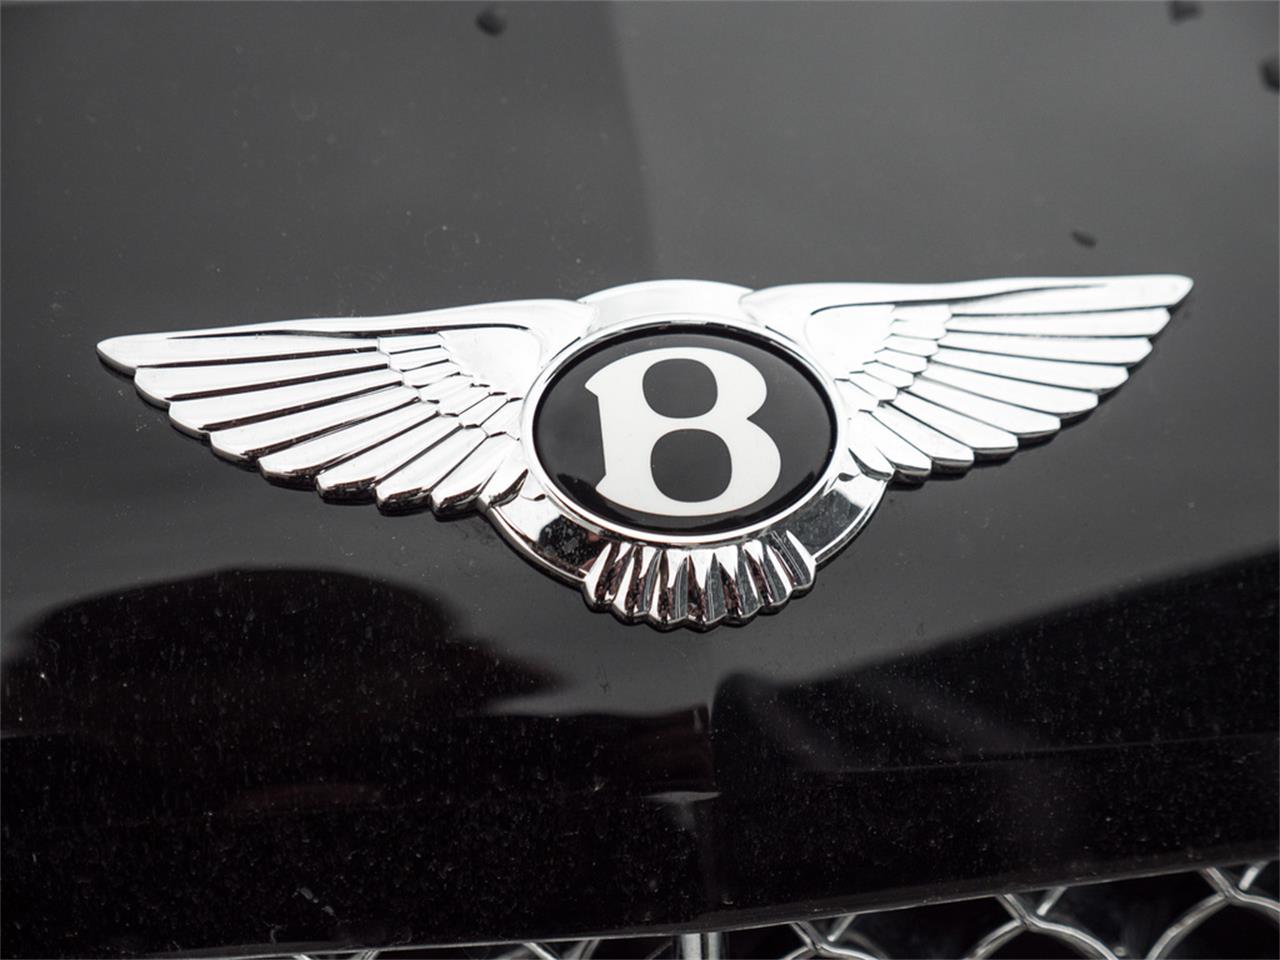 Which car logo is this